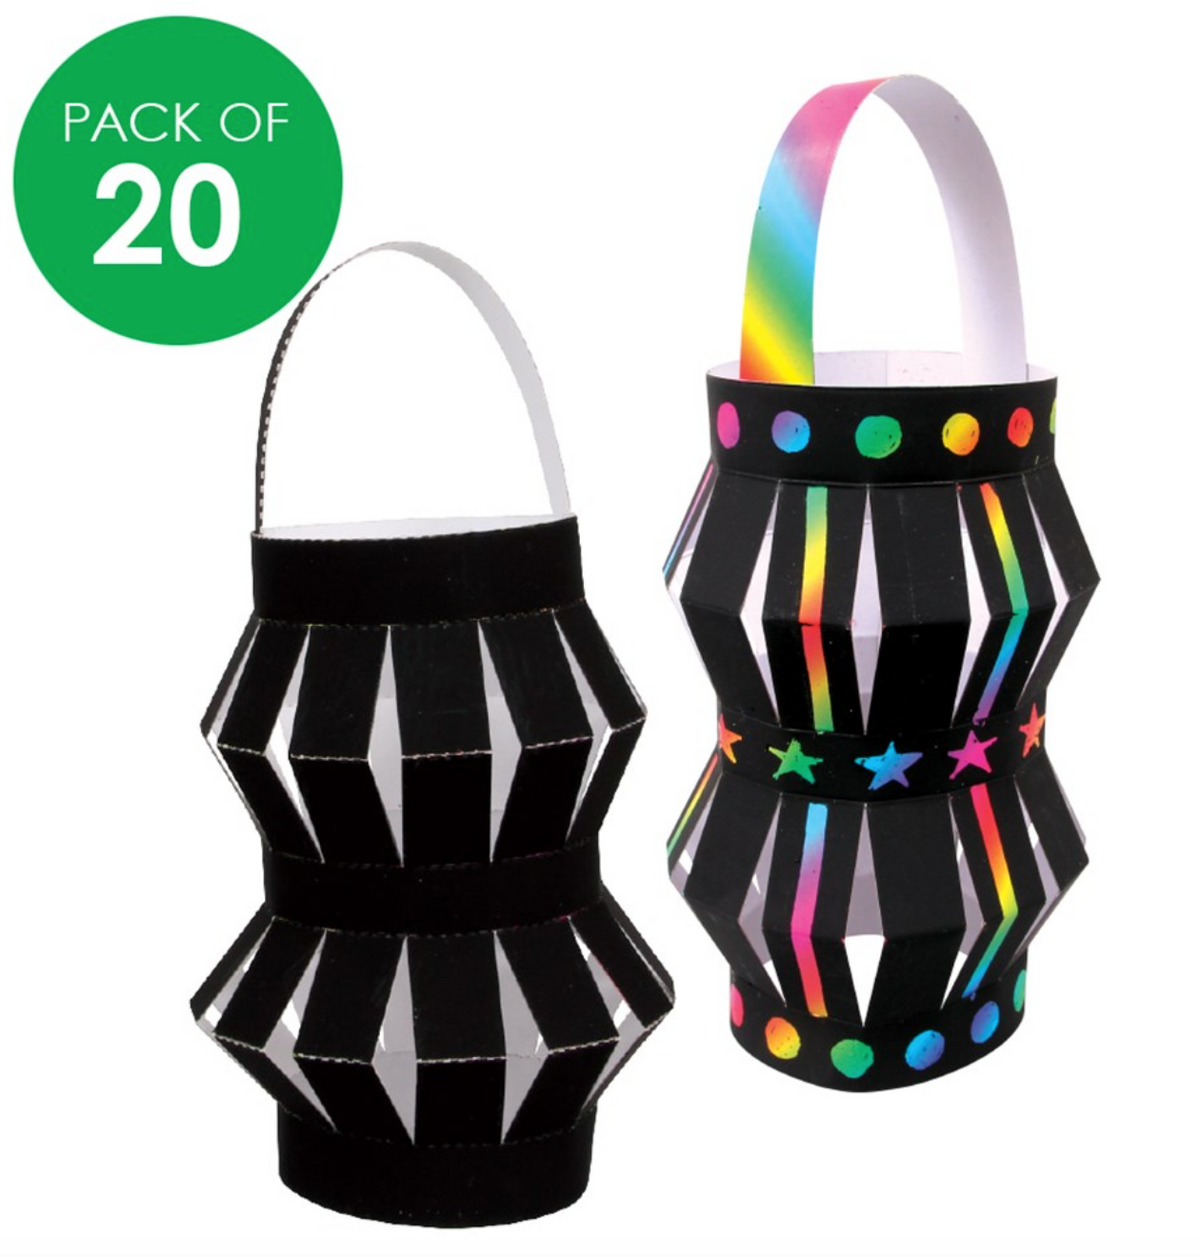 Scratch Board Chinese Lanterns - Pack of 20